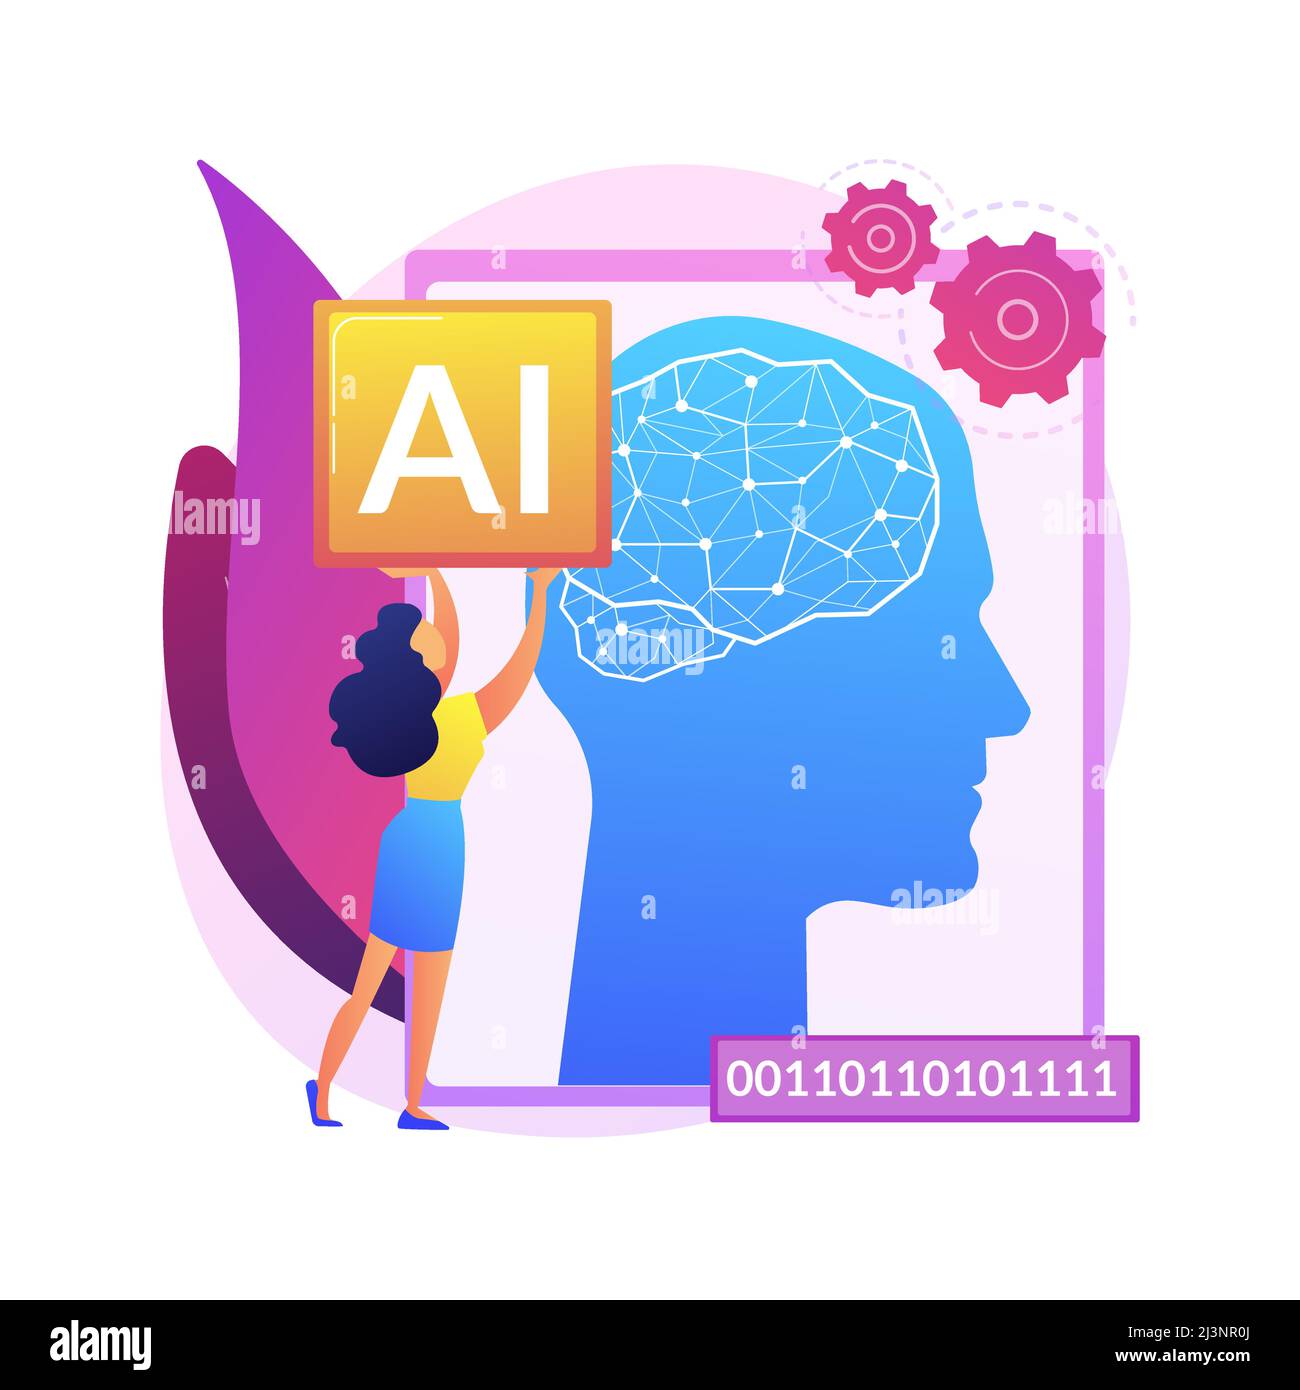 Artificial intelligence abstract concept vector illustration. AI, machine learning, artificial intelligence evolution, high tech, cutting edge technol Stock Vector